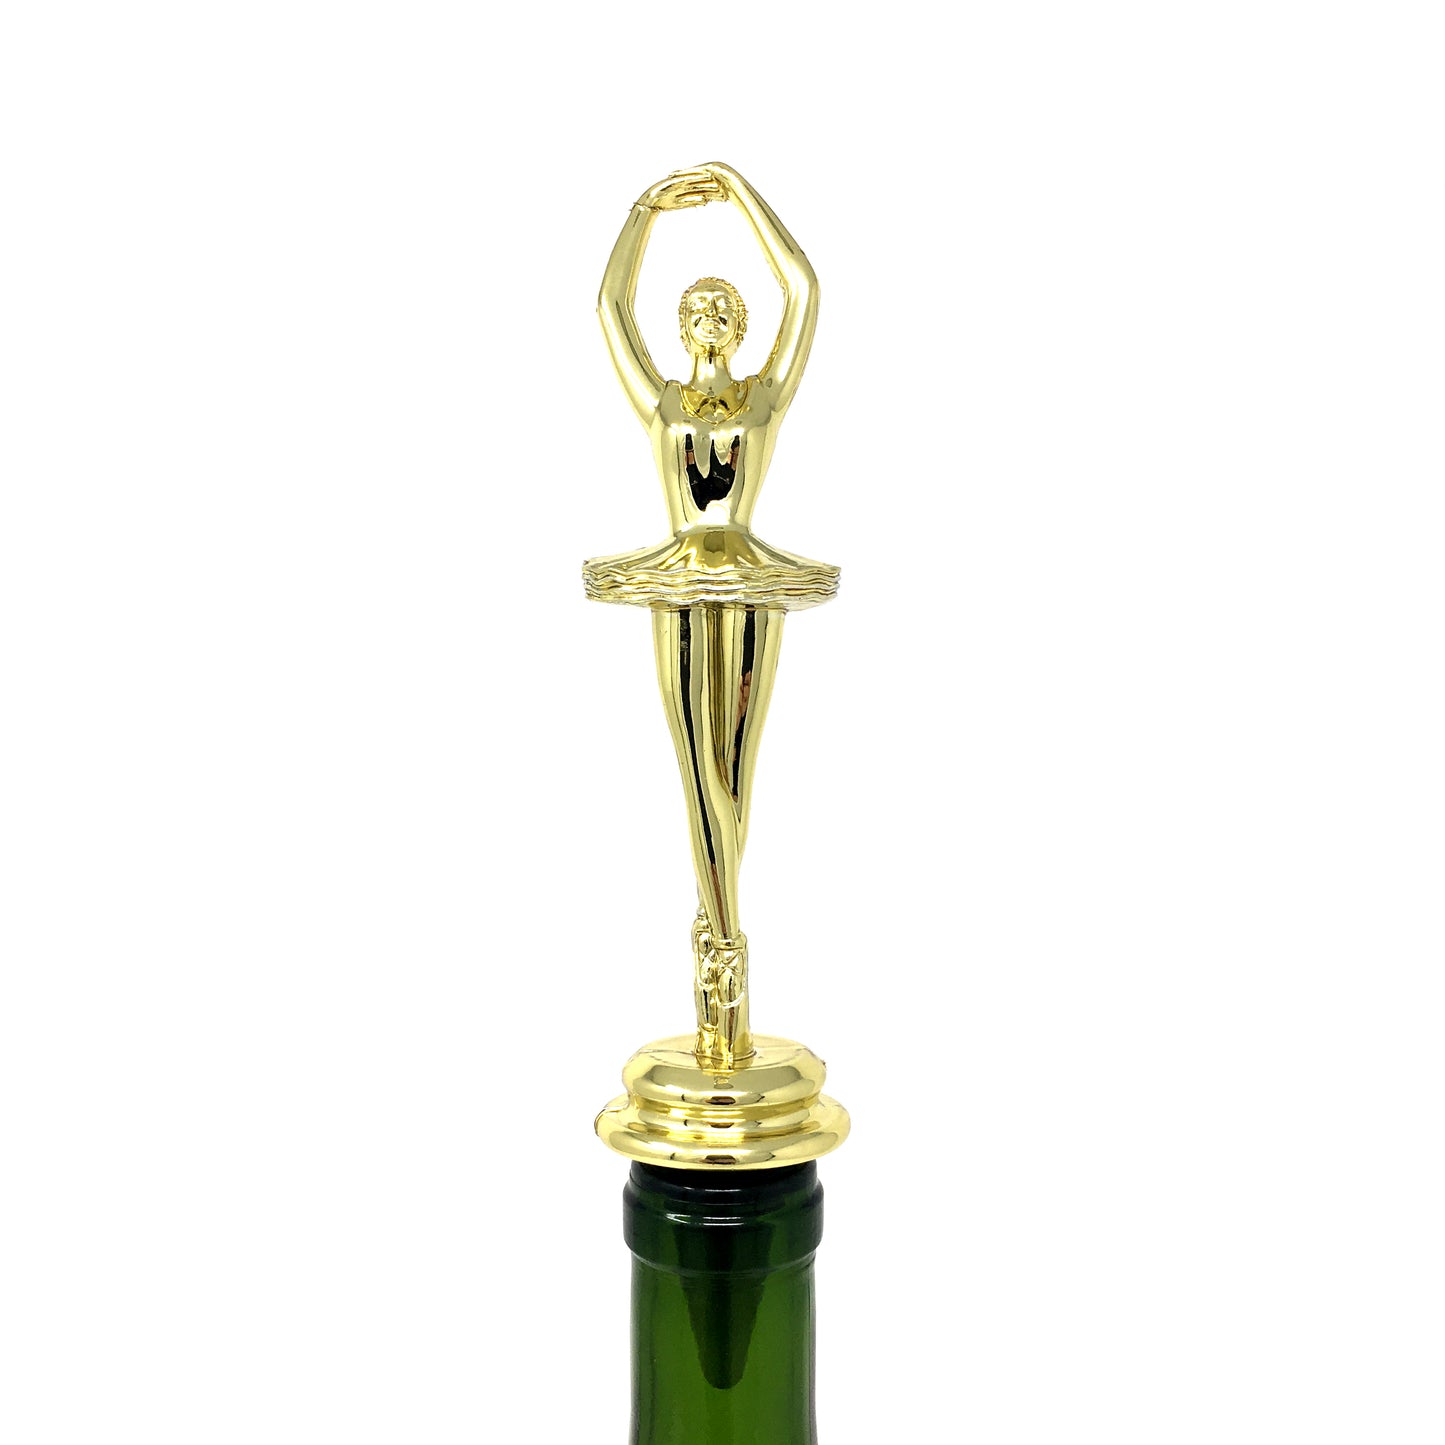 Ballerina Trophy Wine Bottle Stopper with Stainless Steel Base